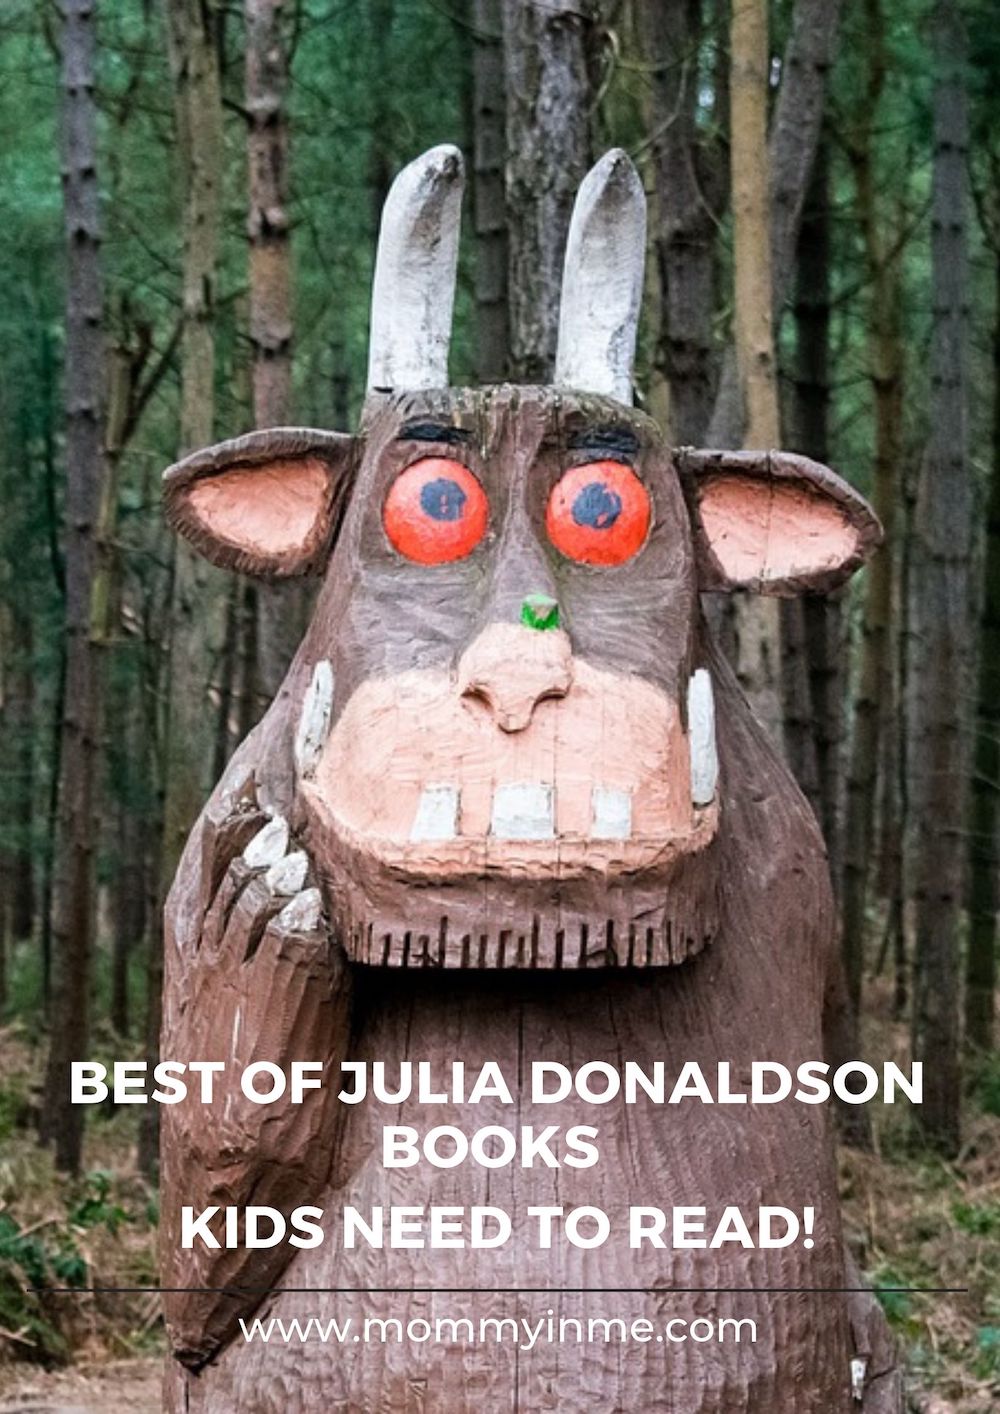 It's time that you need to introduce Kids to story books by Julia Donaldson, the author of The Gruffalo. Read best story books for kids 3-6years. #Thegruffalo #gruffalo #storybooks #kidsbooks #storytelling #Juliadonaldson